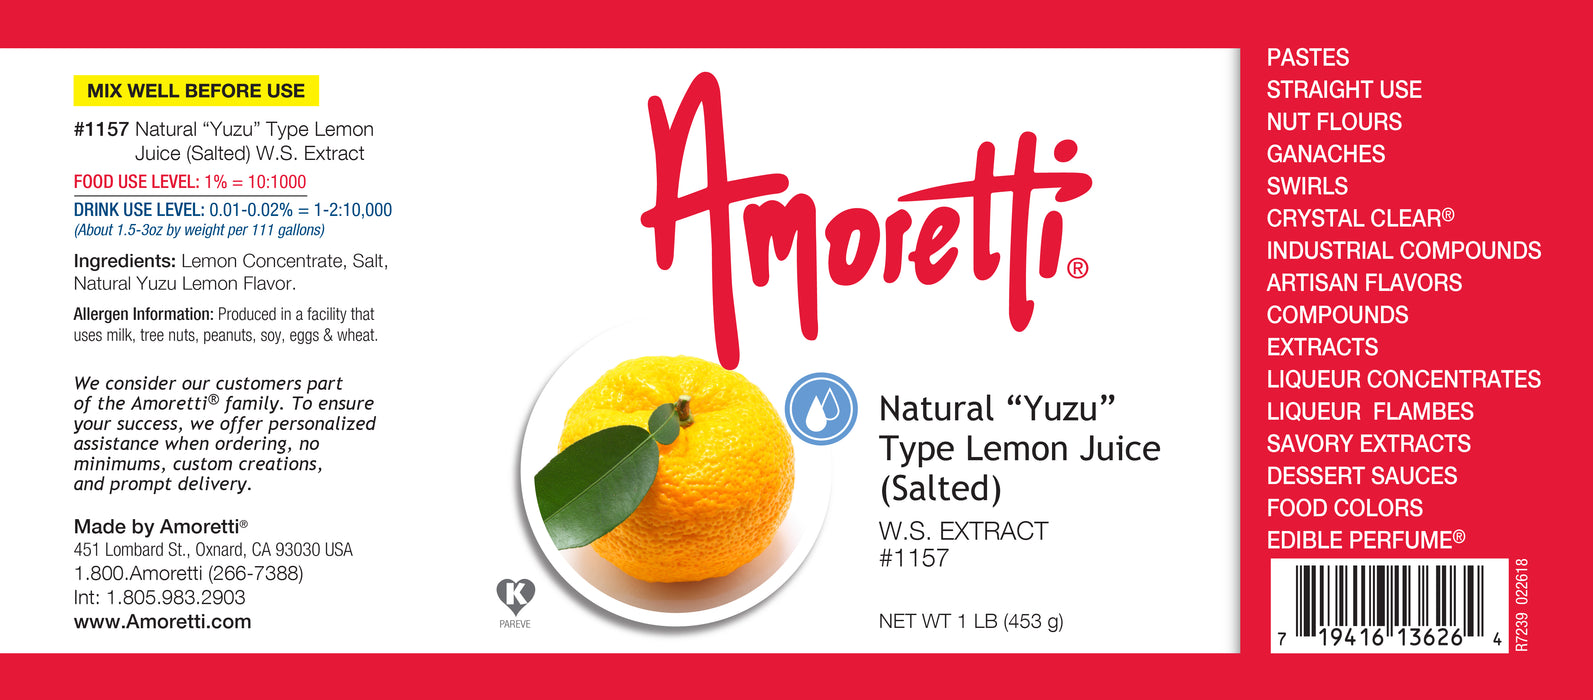 Natural "Yuzu" Type Lemon Juice Extract Water Soluble (salted)